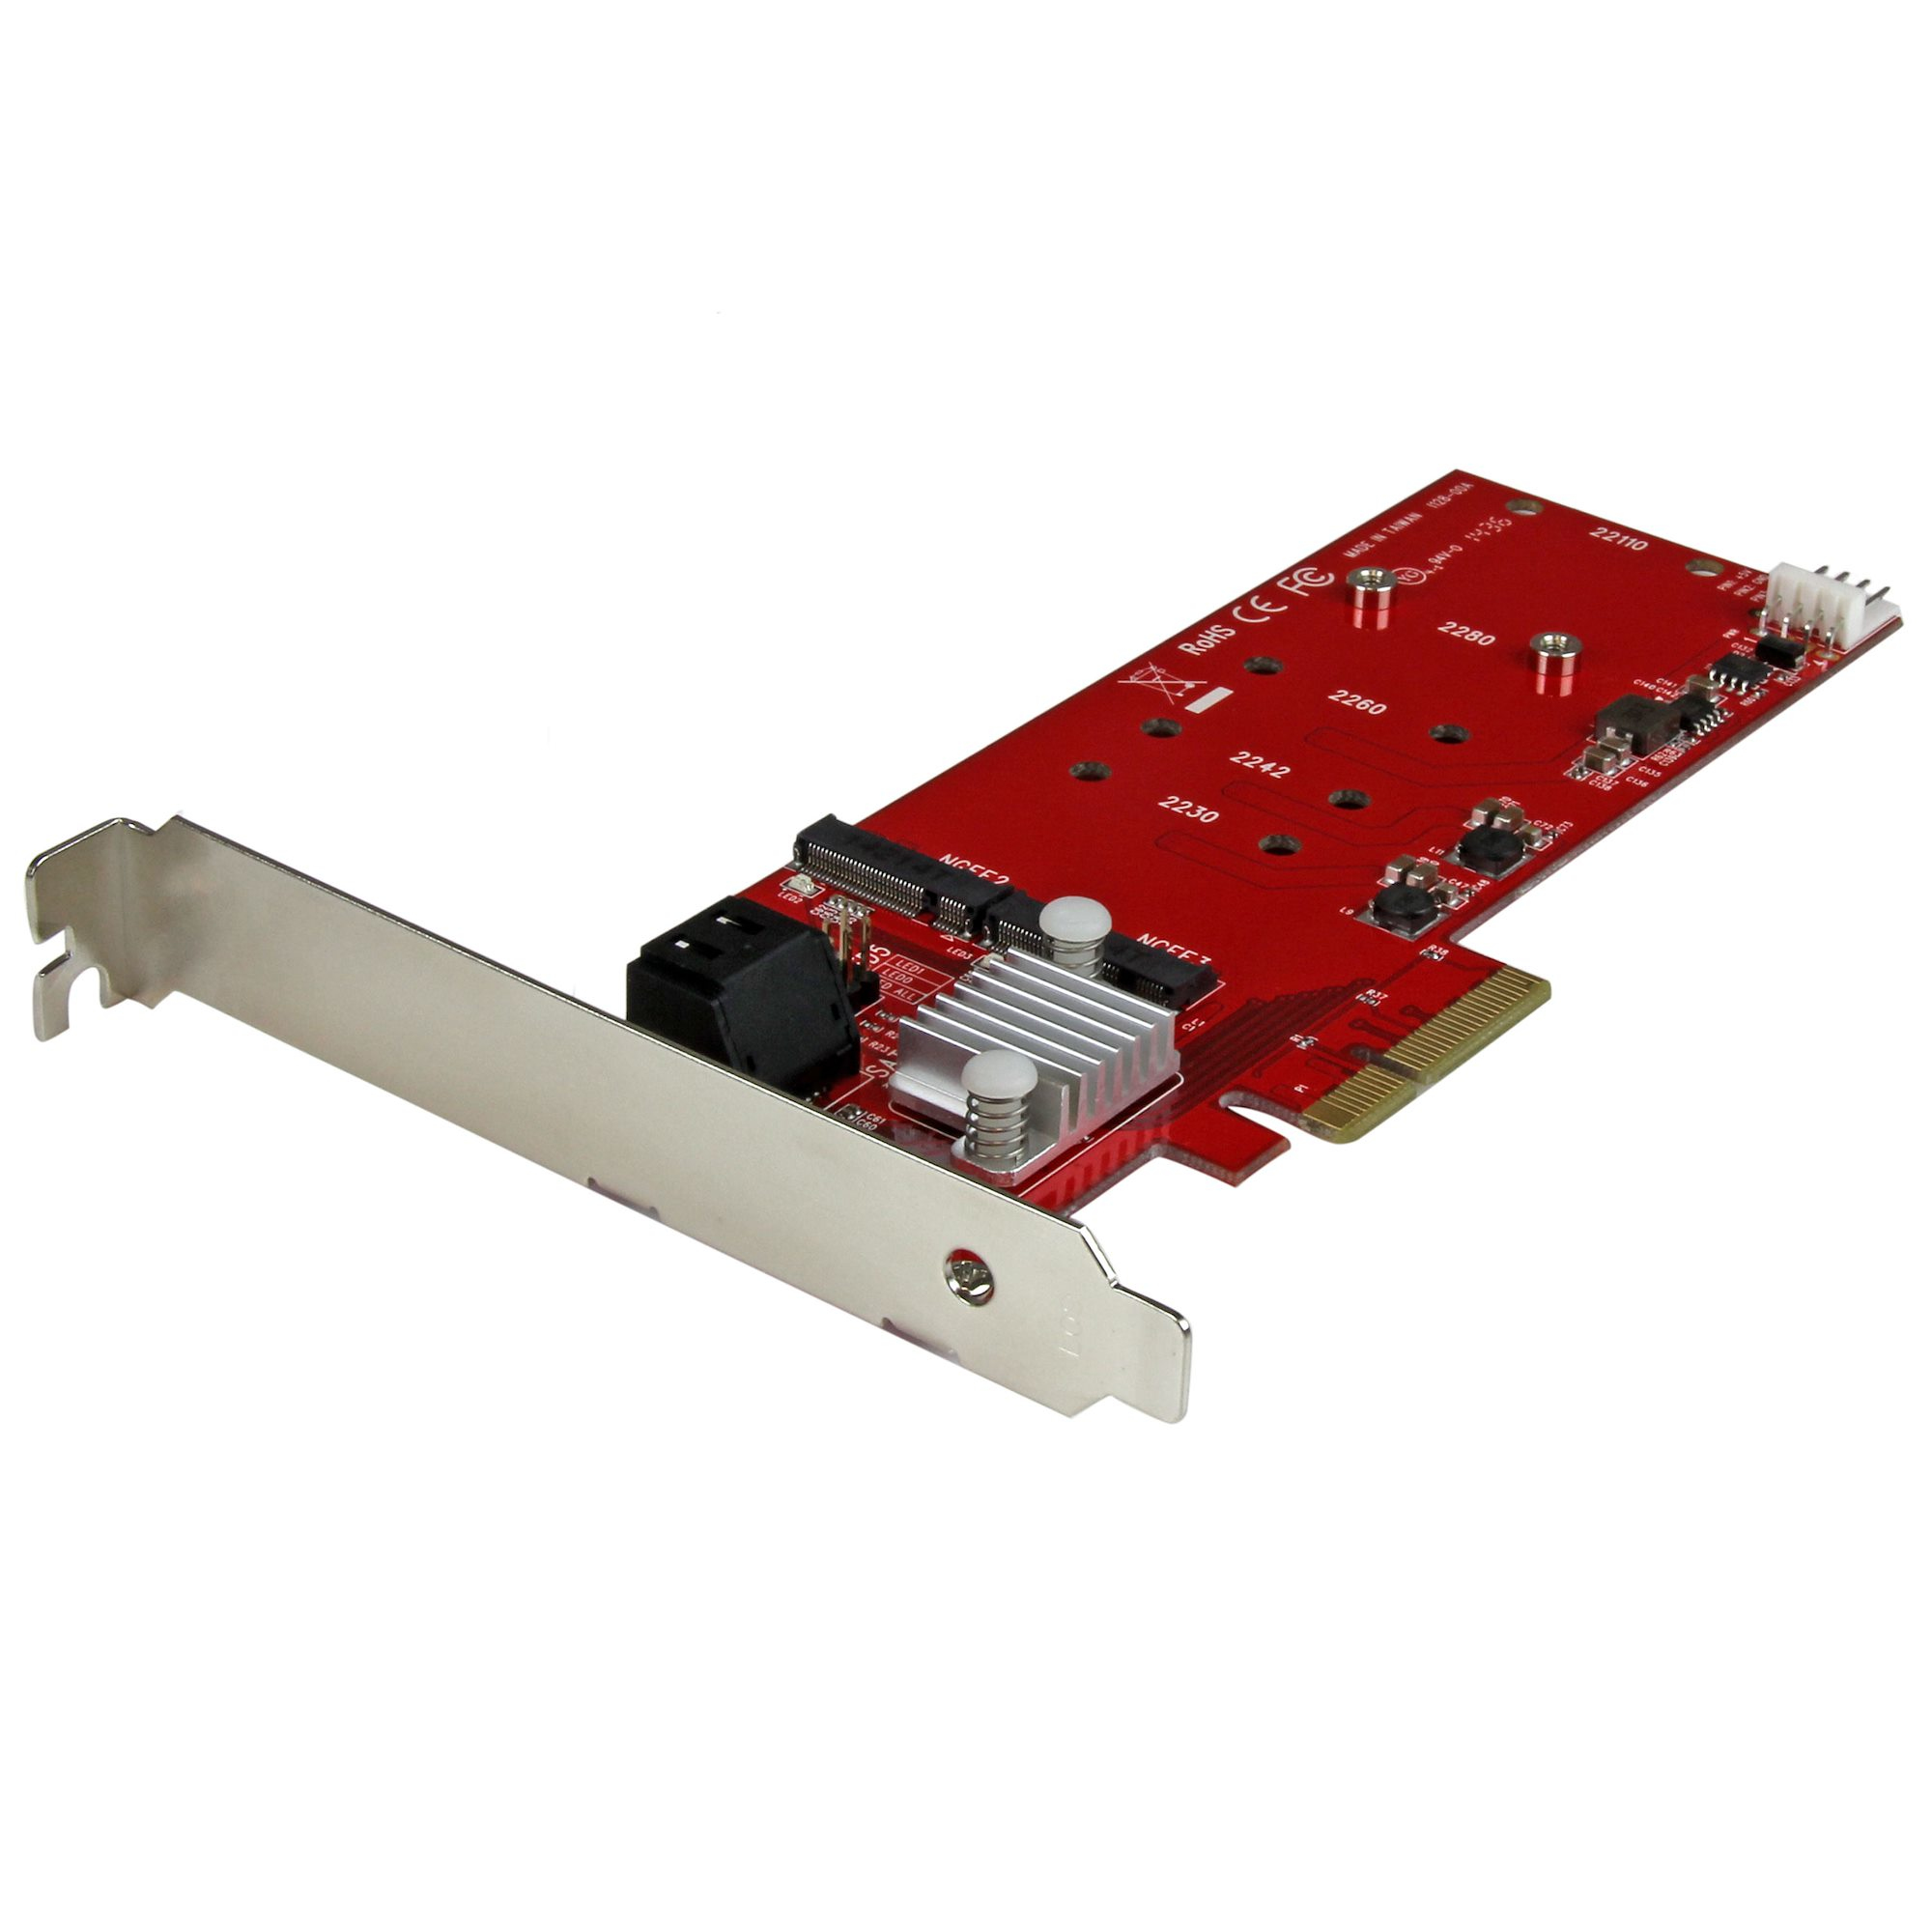 chorro Series de tiempo expandir StarTech.com Tarjeta PCI Express Controladora de 2x SSD NGFF M.2 y 2x  Puertos SATA III, 3 in distributor/wholesale stock for resellers to sell -  Stock In The Channel